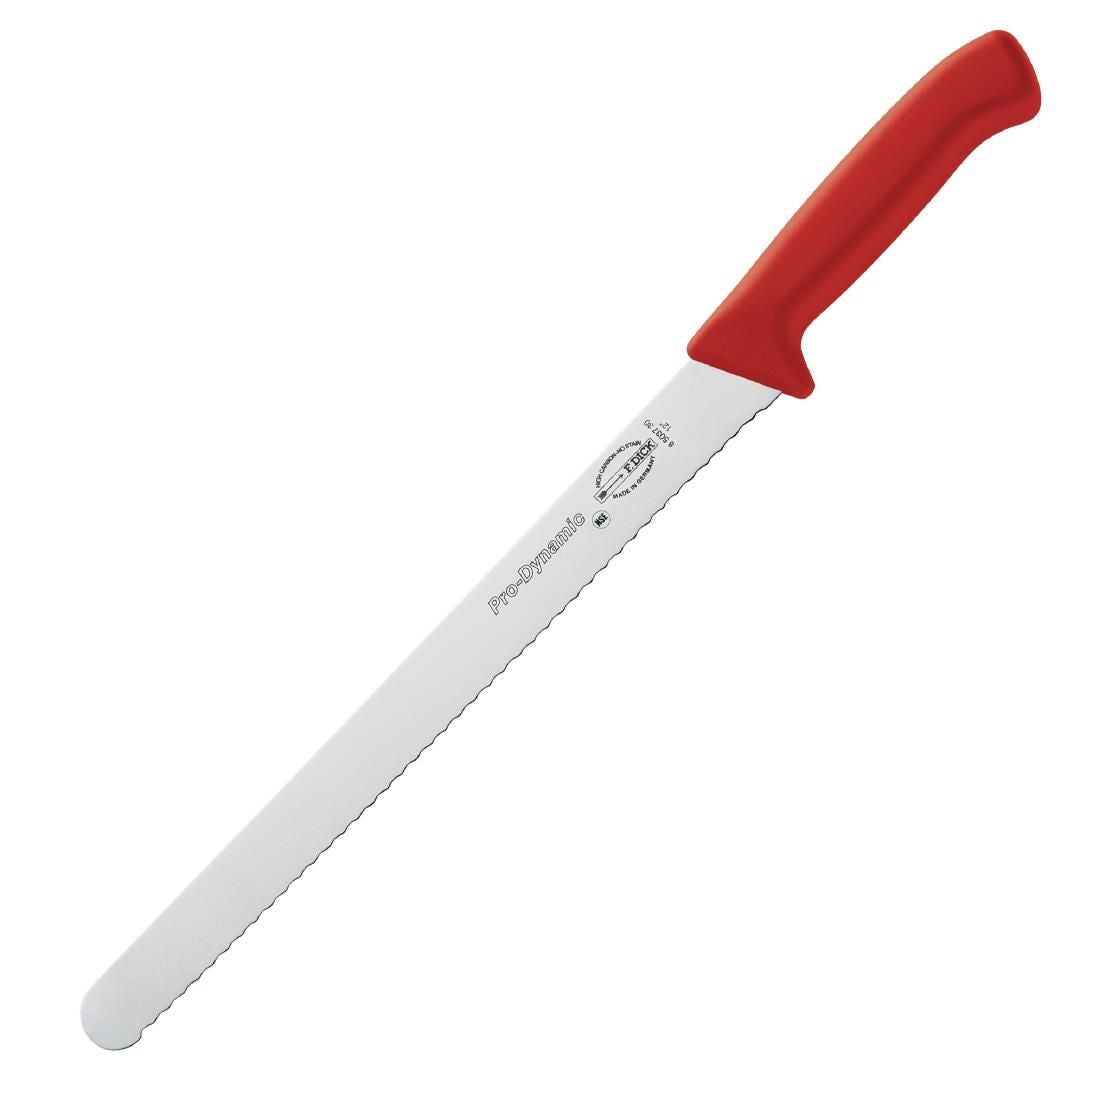 DL347 Dick Pro Dynamic HACCP Slicer Red 30.5cm JD Catering Equipment Solutions Ltd